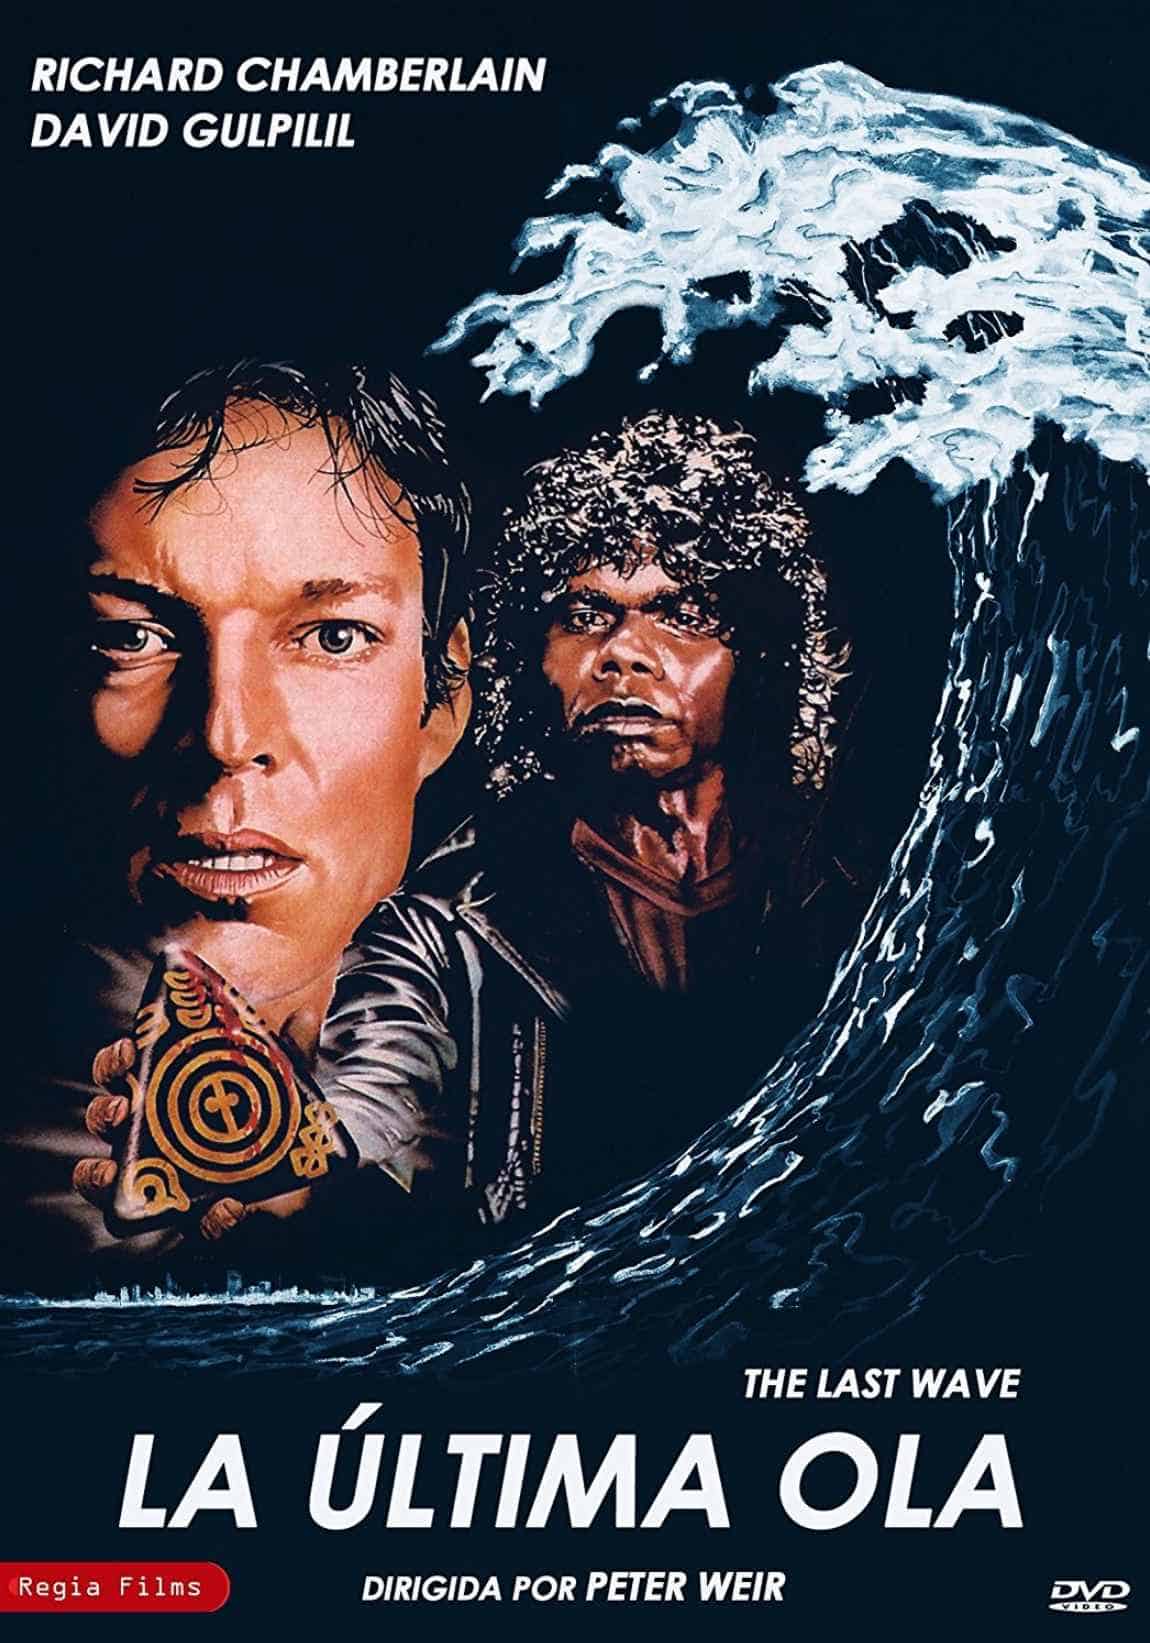 The Last Wave (1977)